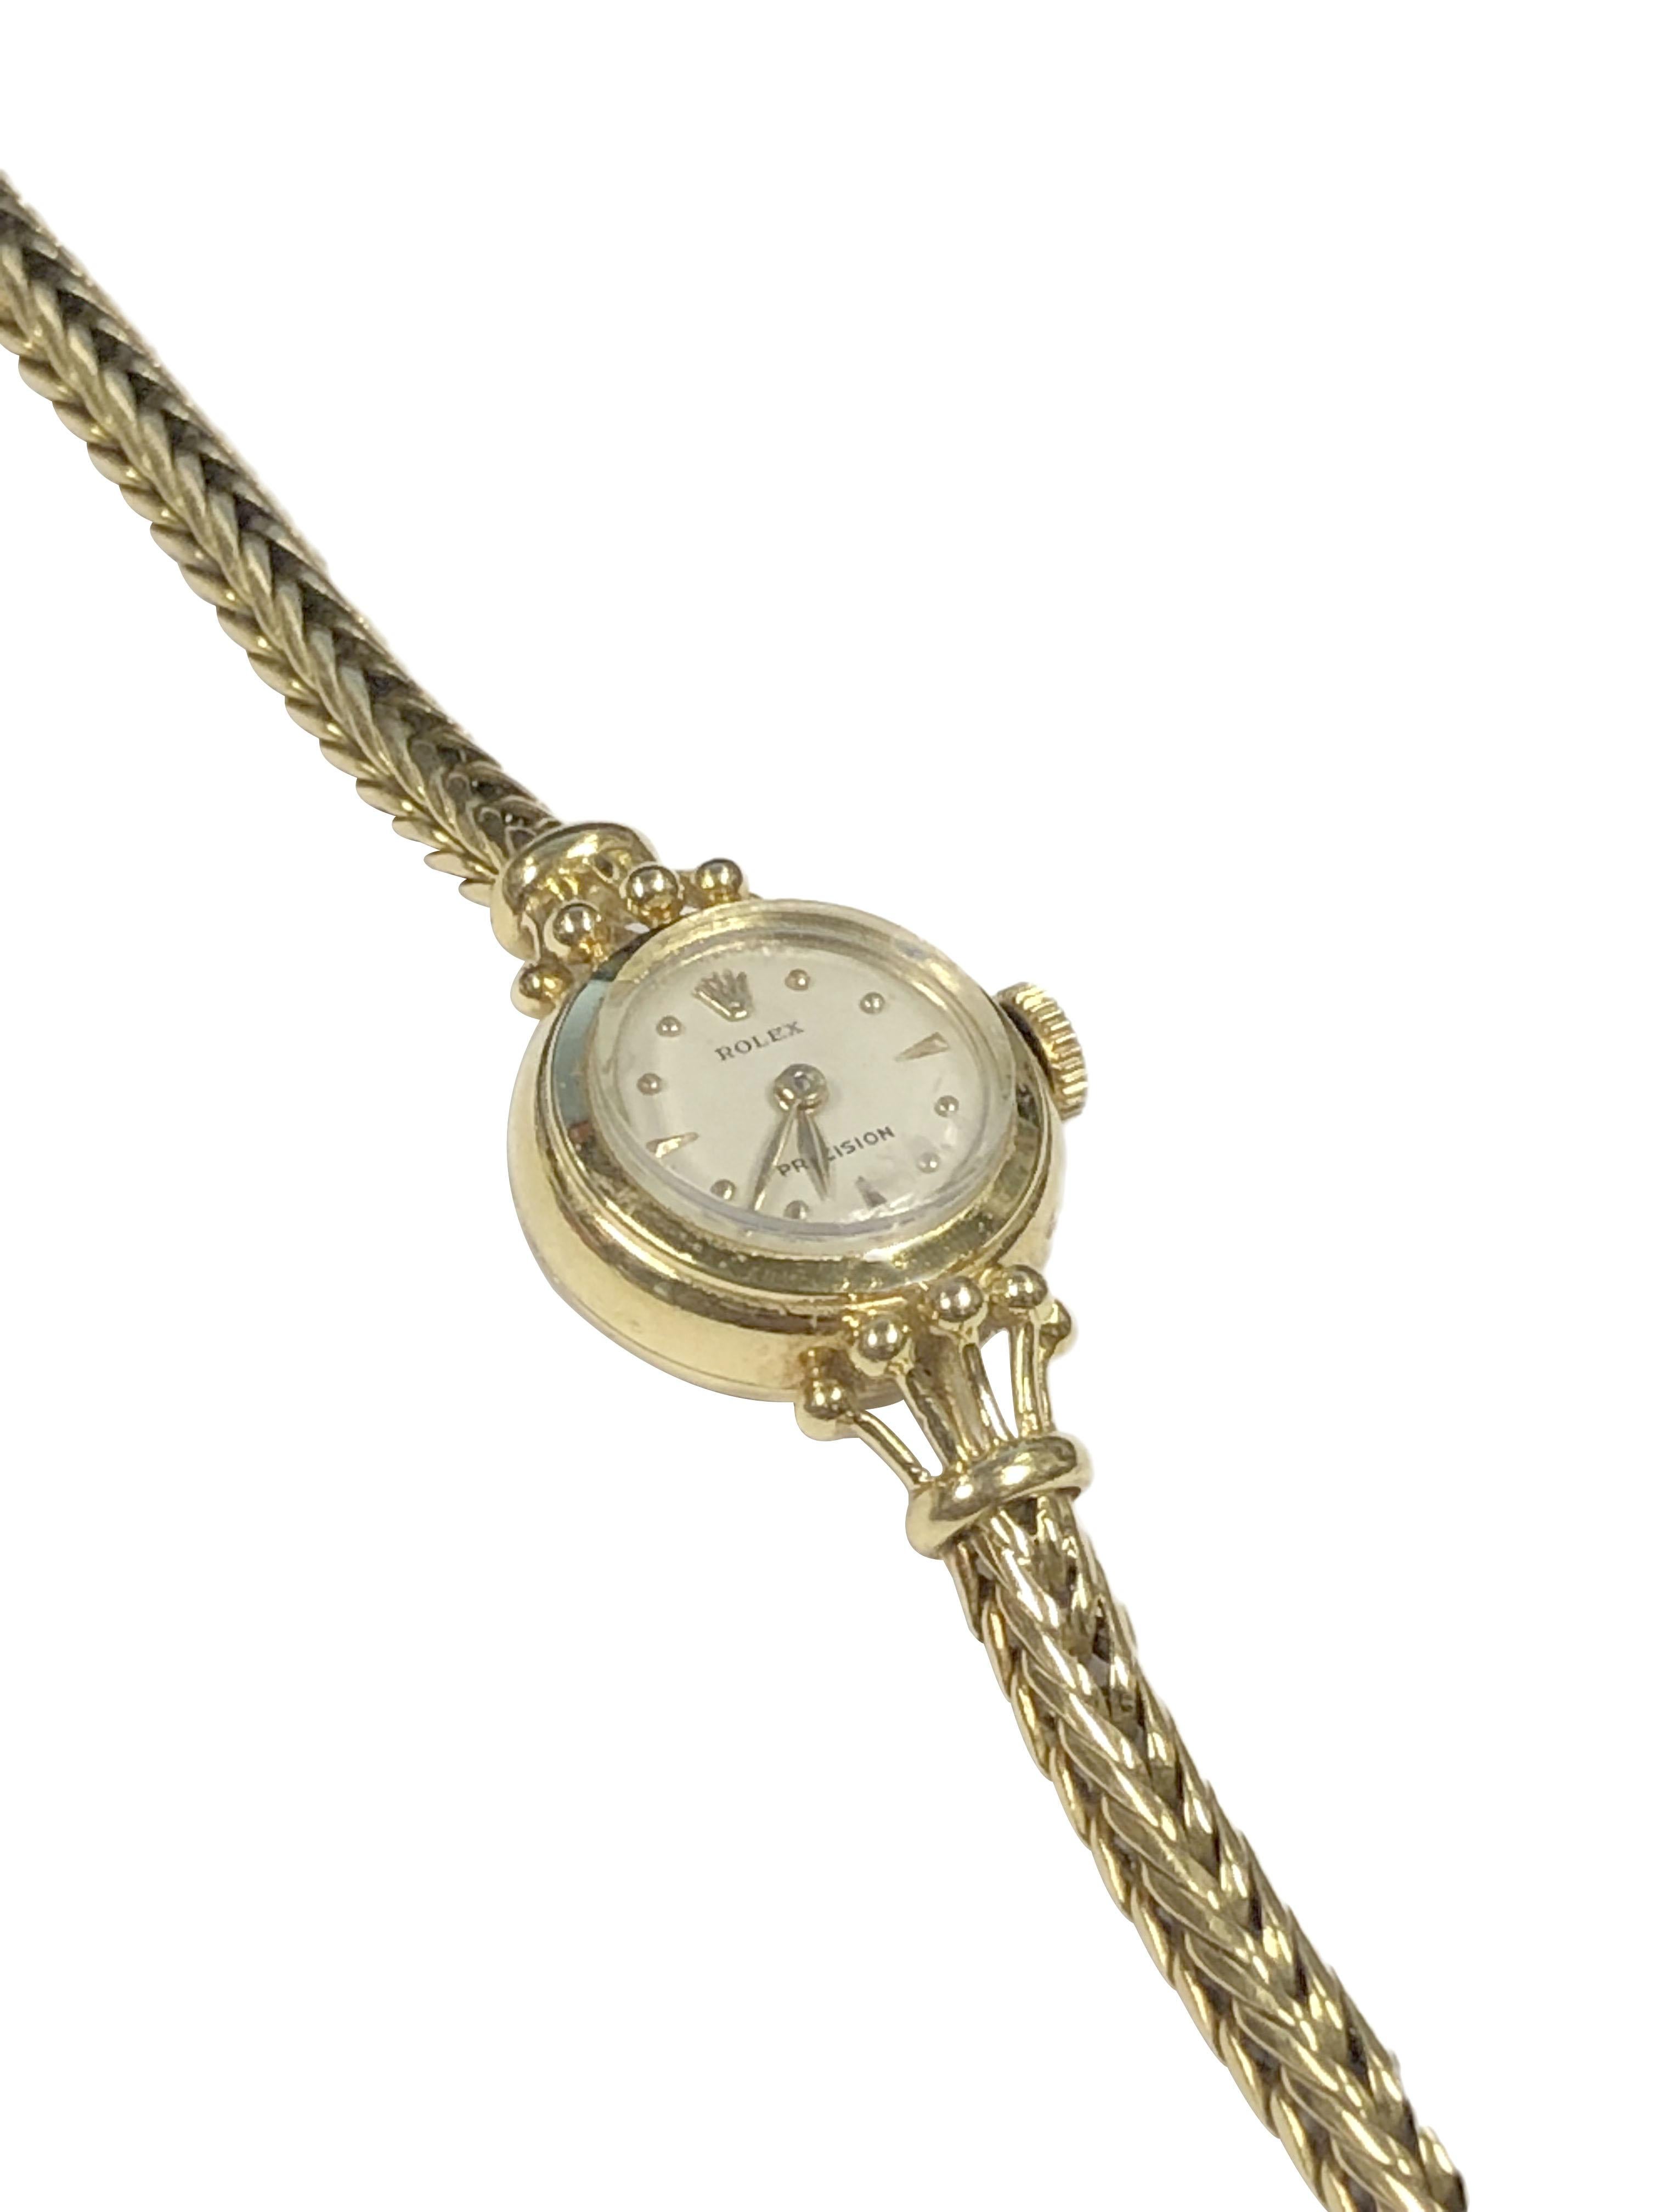 Circa 1940s Rolex Ladies Precision Wrist Watch, 16 M.M. Diameter X 5 M.M. thick 14k Yellow Gold 2 Piece case, 17 Jewel mechanical, manual wind nickle lever movement. Original mint condition White dial with raised Gold markers, Rolex logo crown.